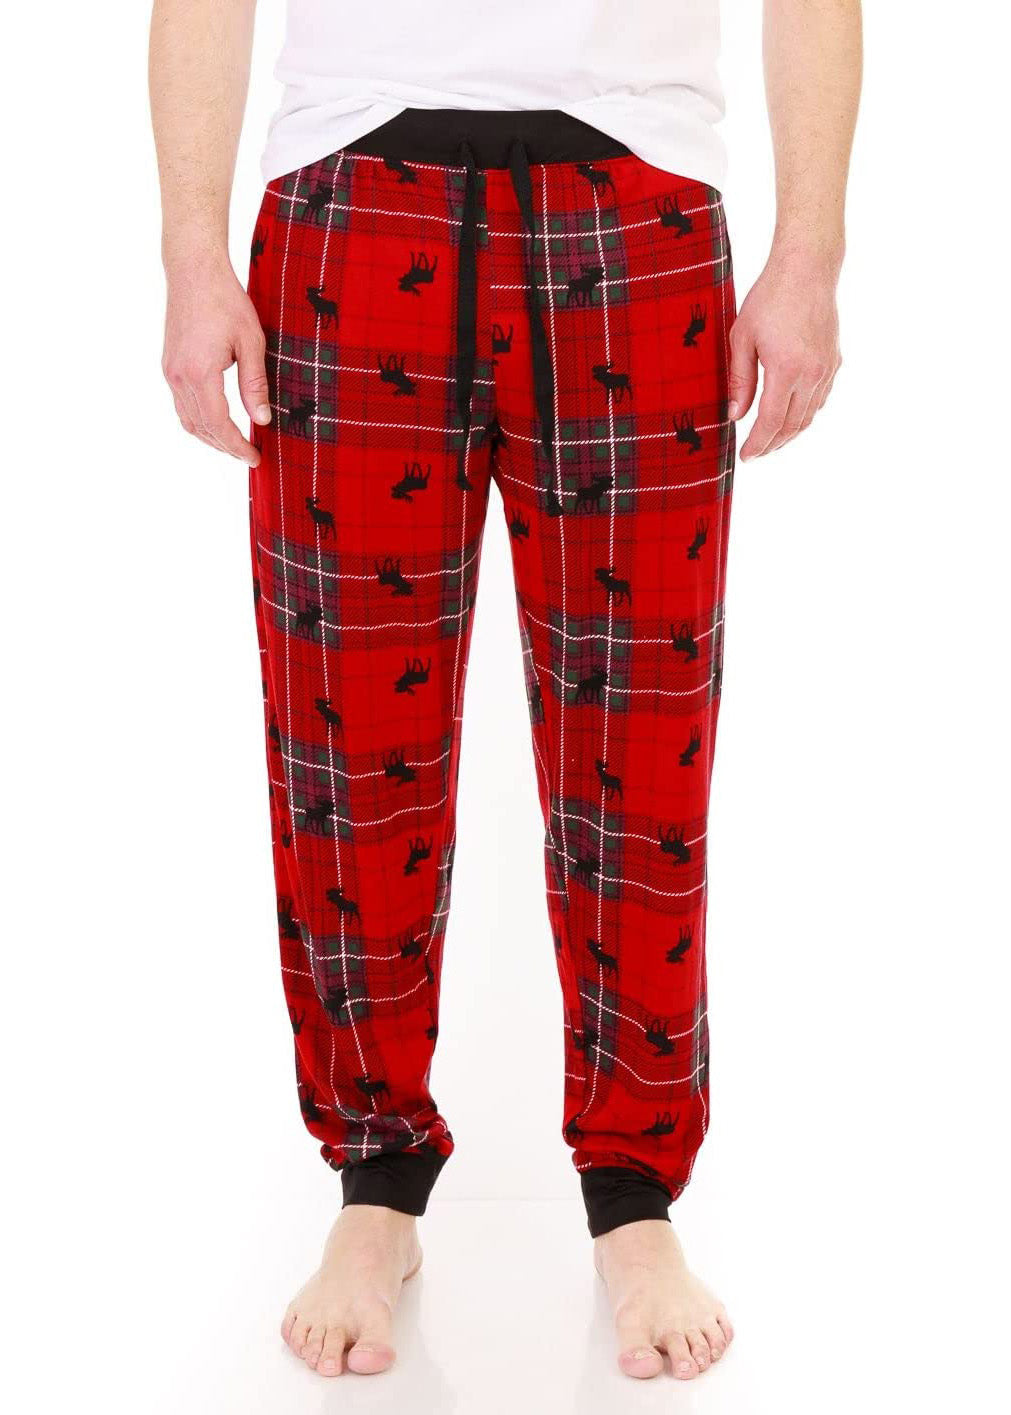 PJ joggers with soft velvety texture, stretch, elastic waistband, drawstring, and stylish ankle cuff. This pattern is small black moose on a tartan, on red. Black waist and cuff. Looser fit